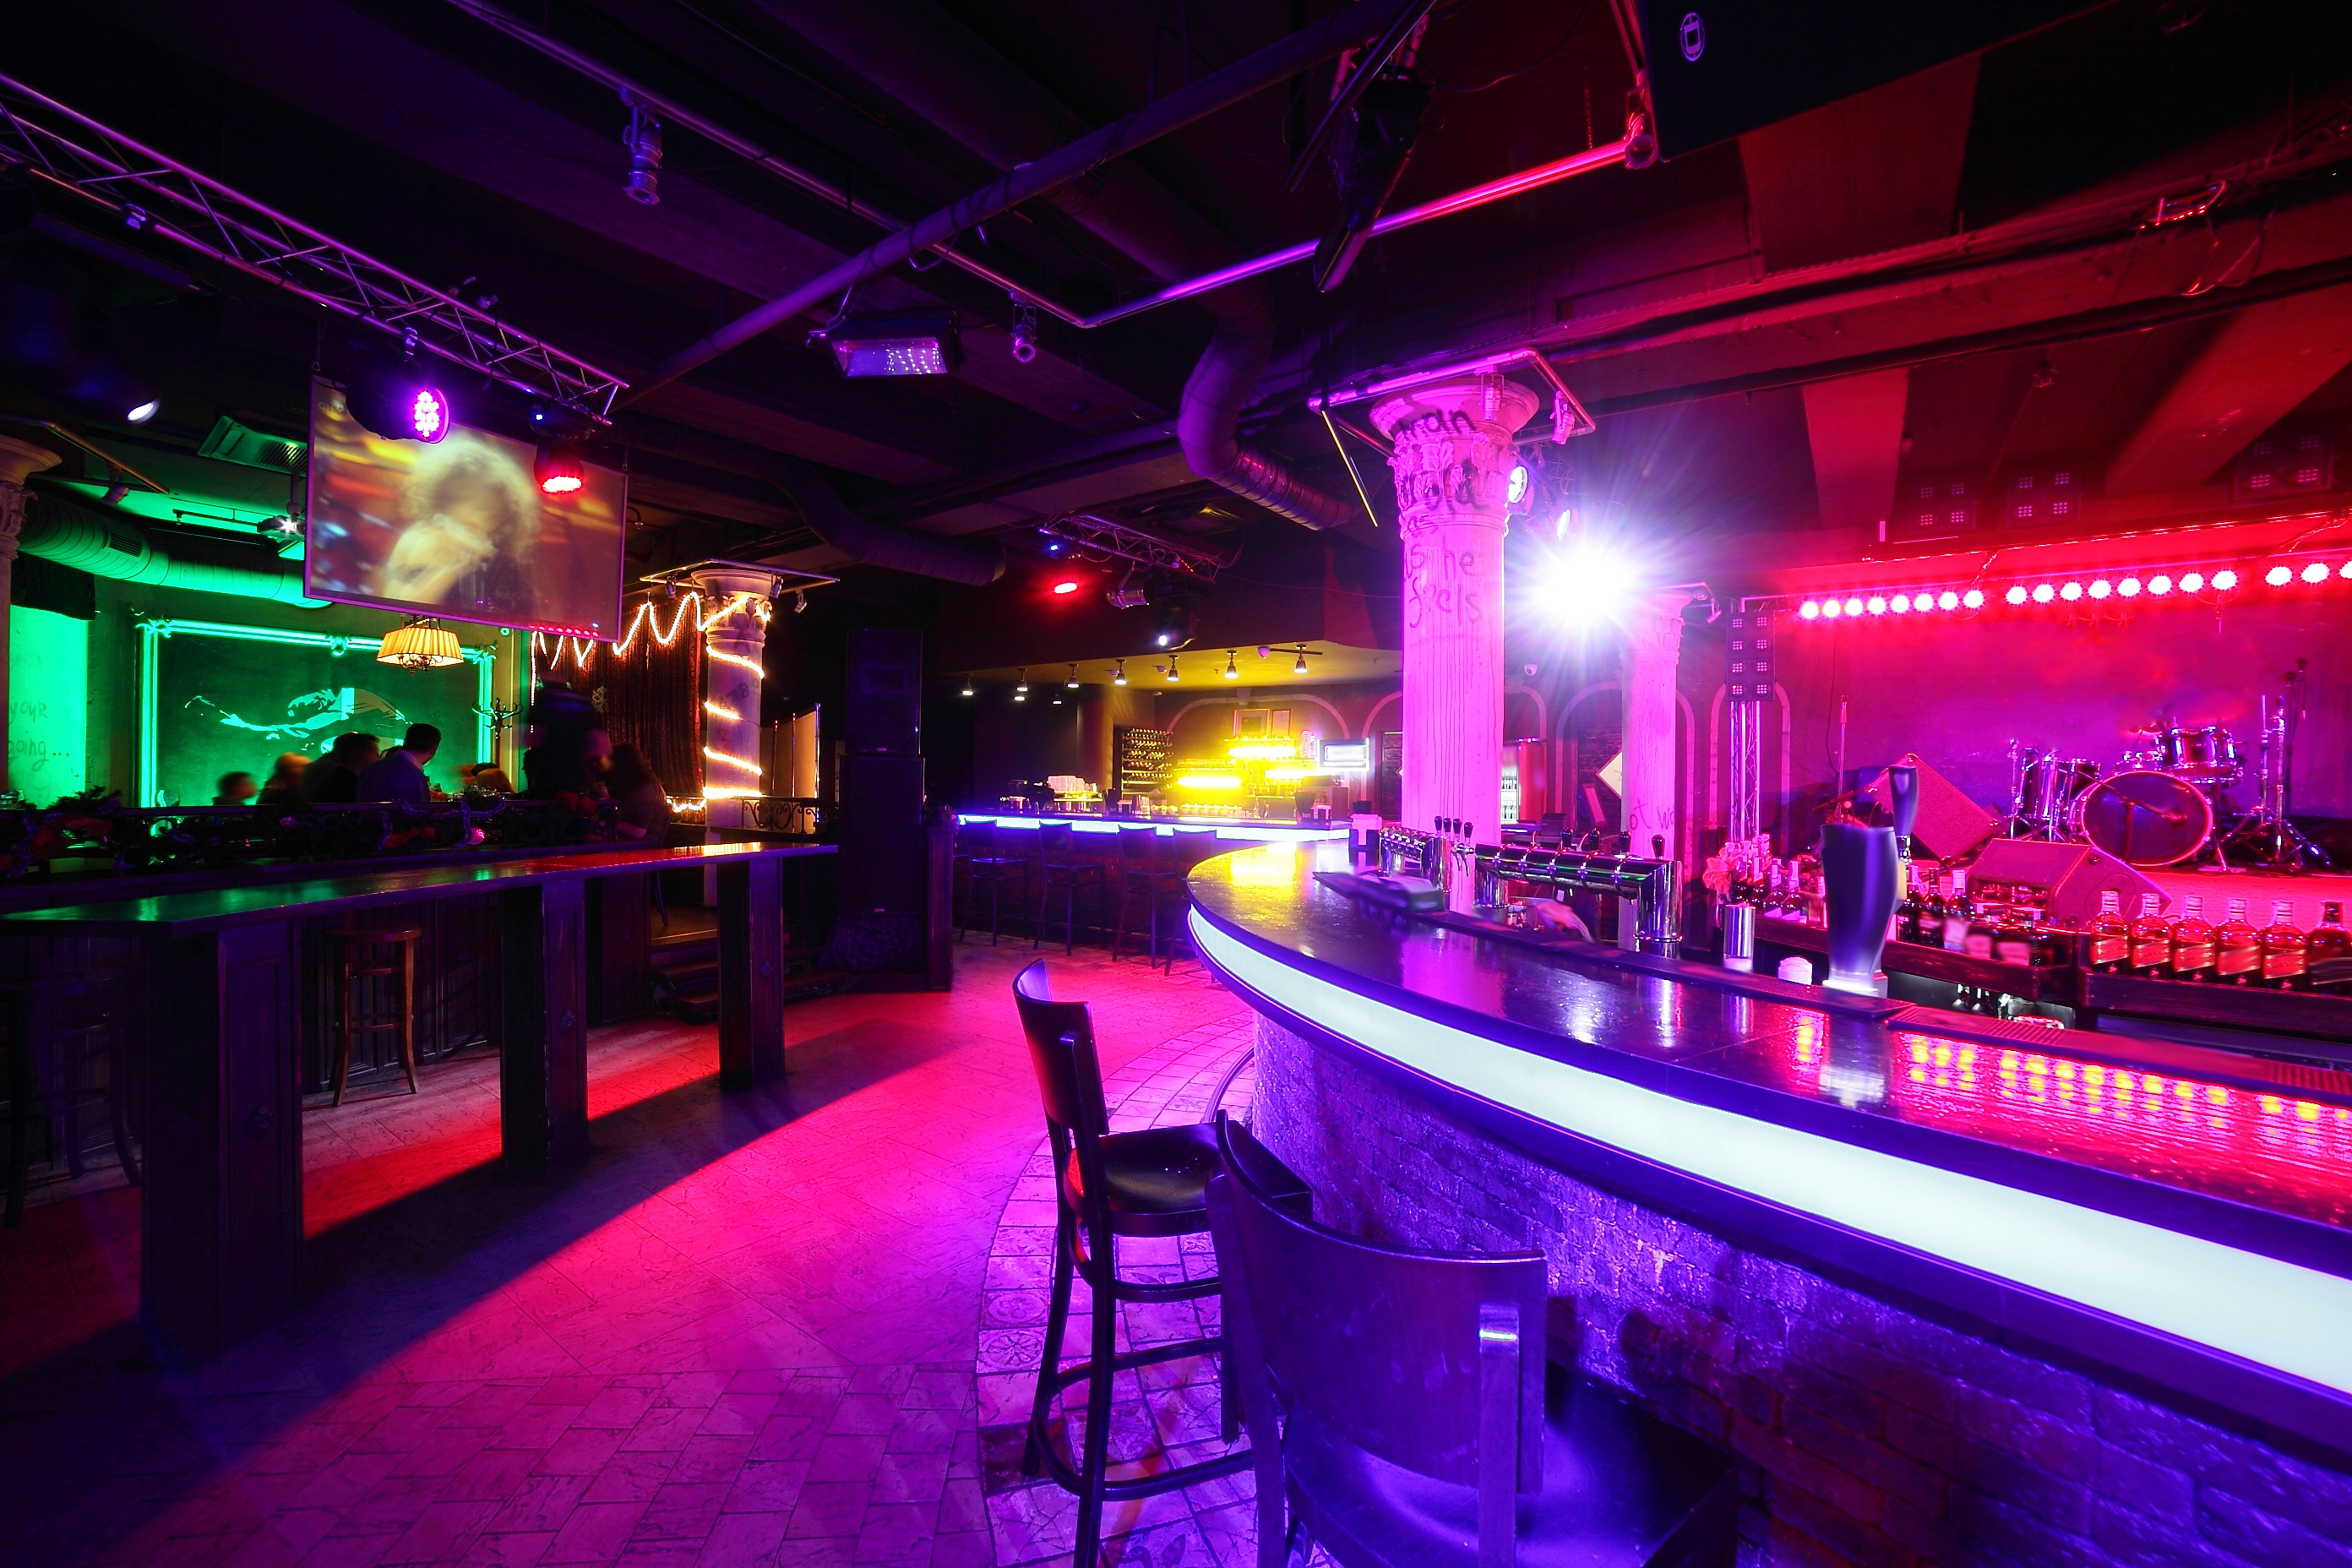 A nightclub with bright lights | Source: Shutterstock